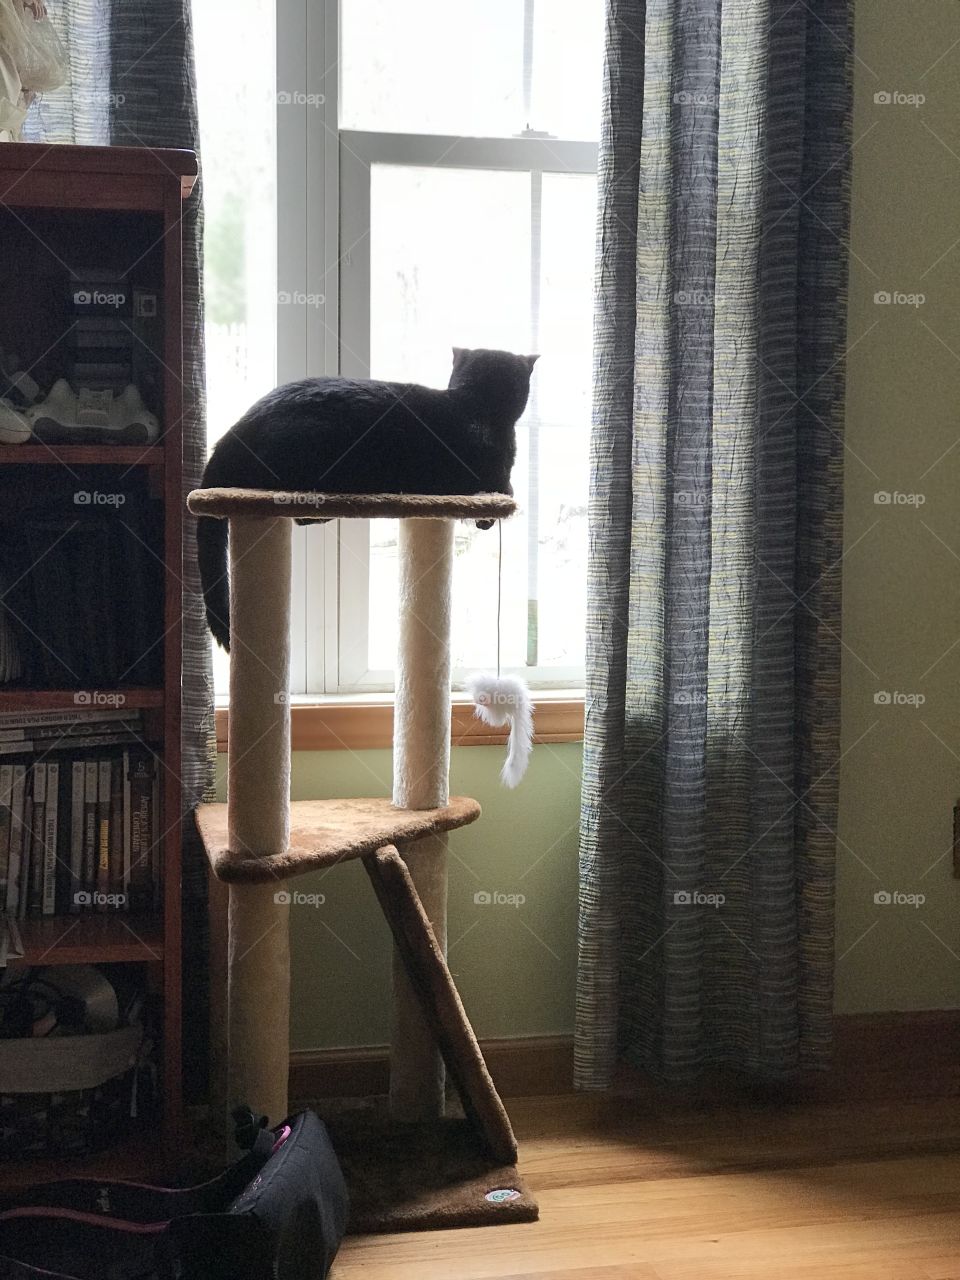 Her spot; Black USA cat staring out front window while laying on a small cat tree